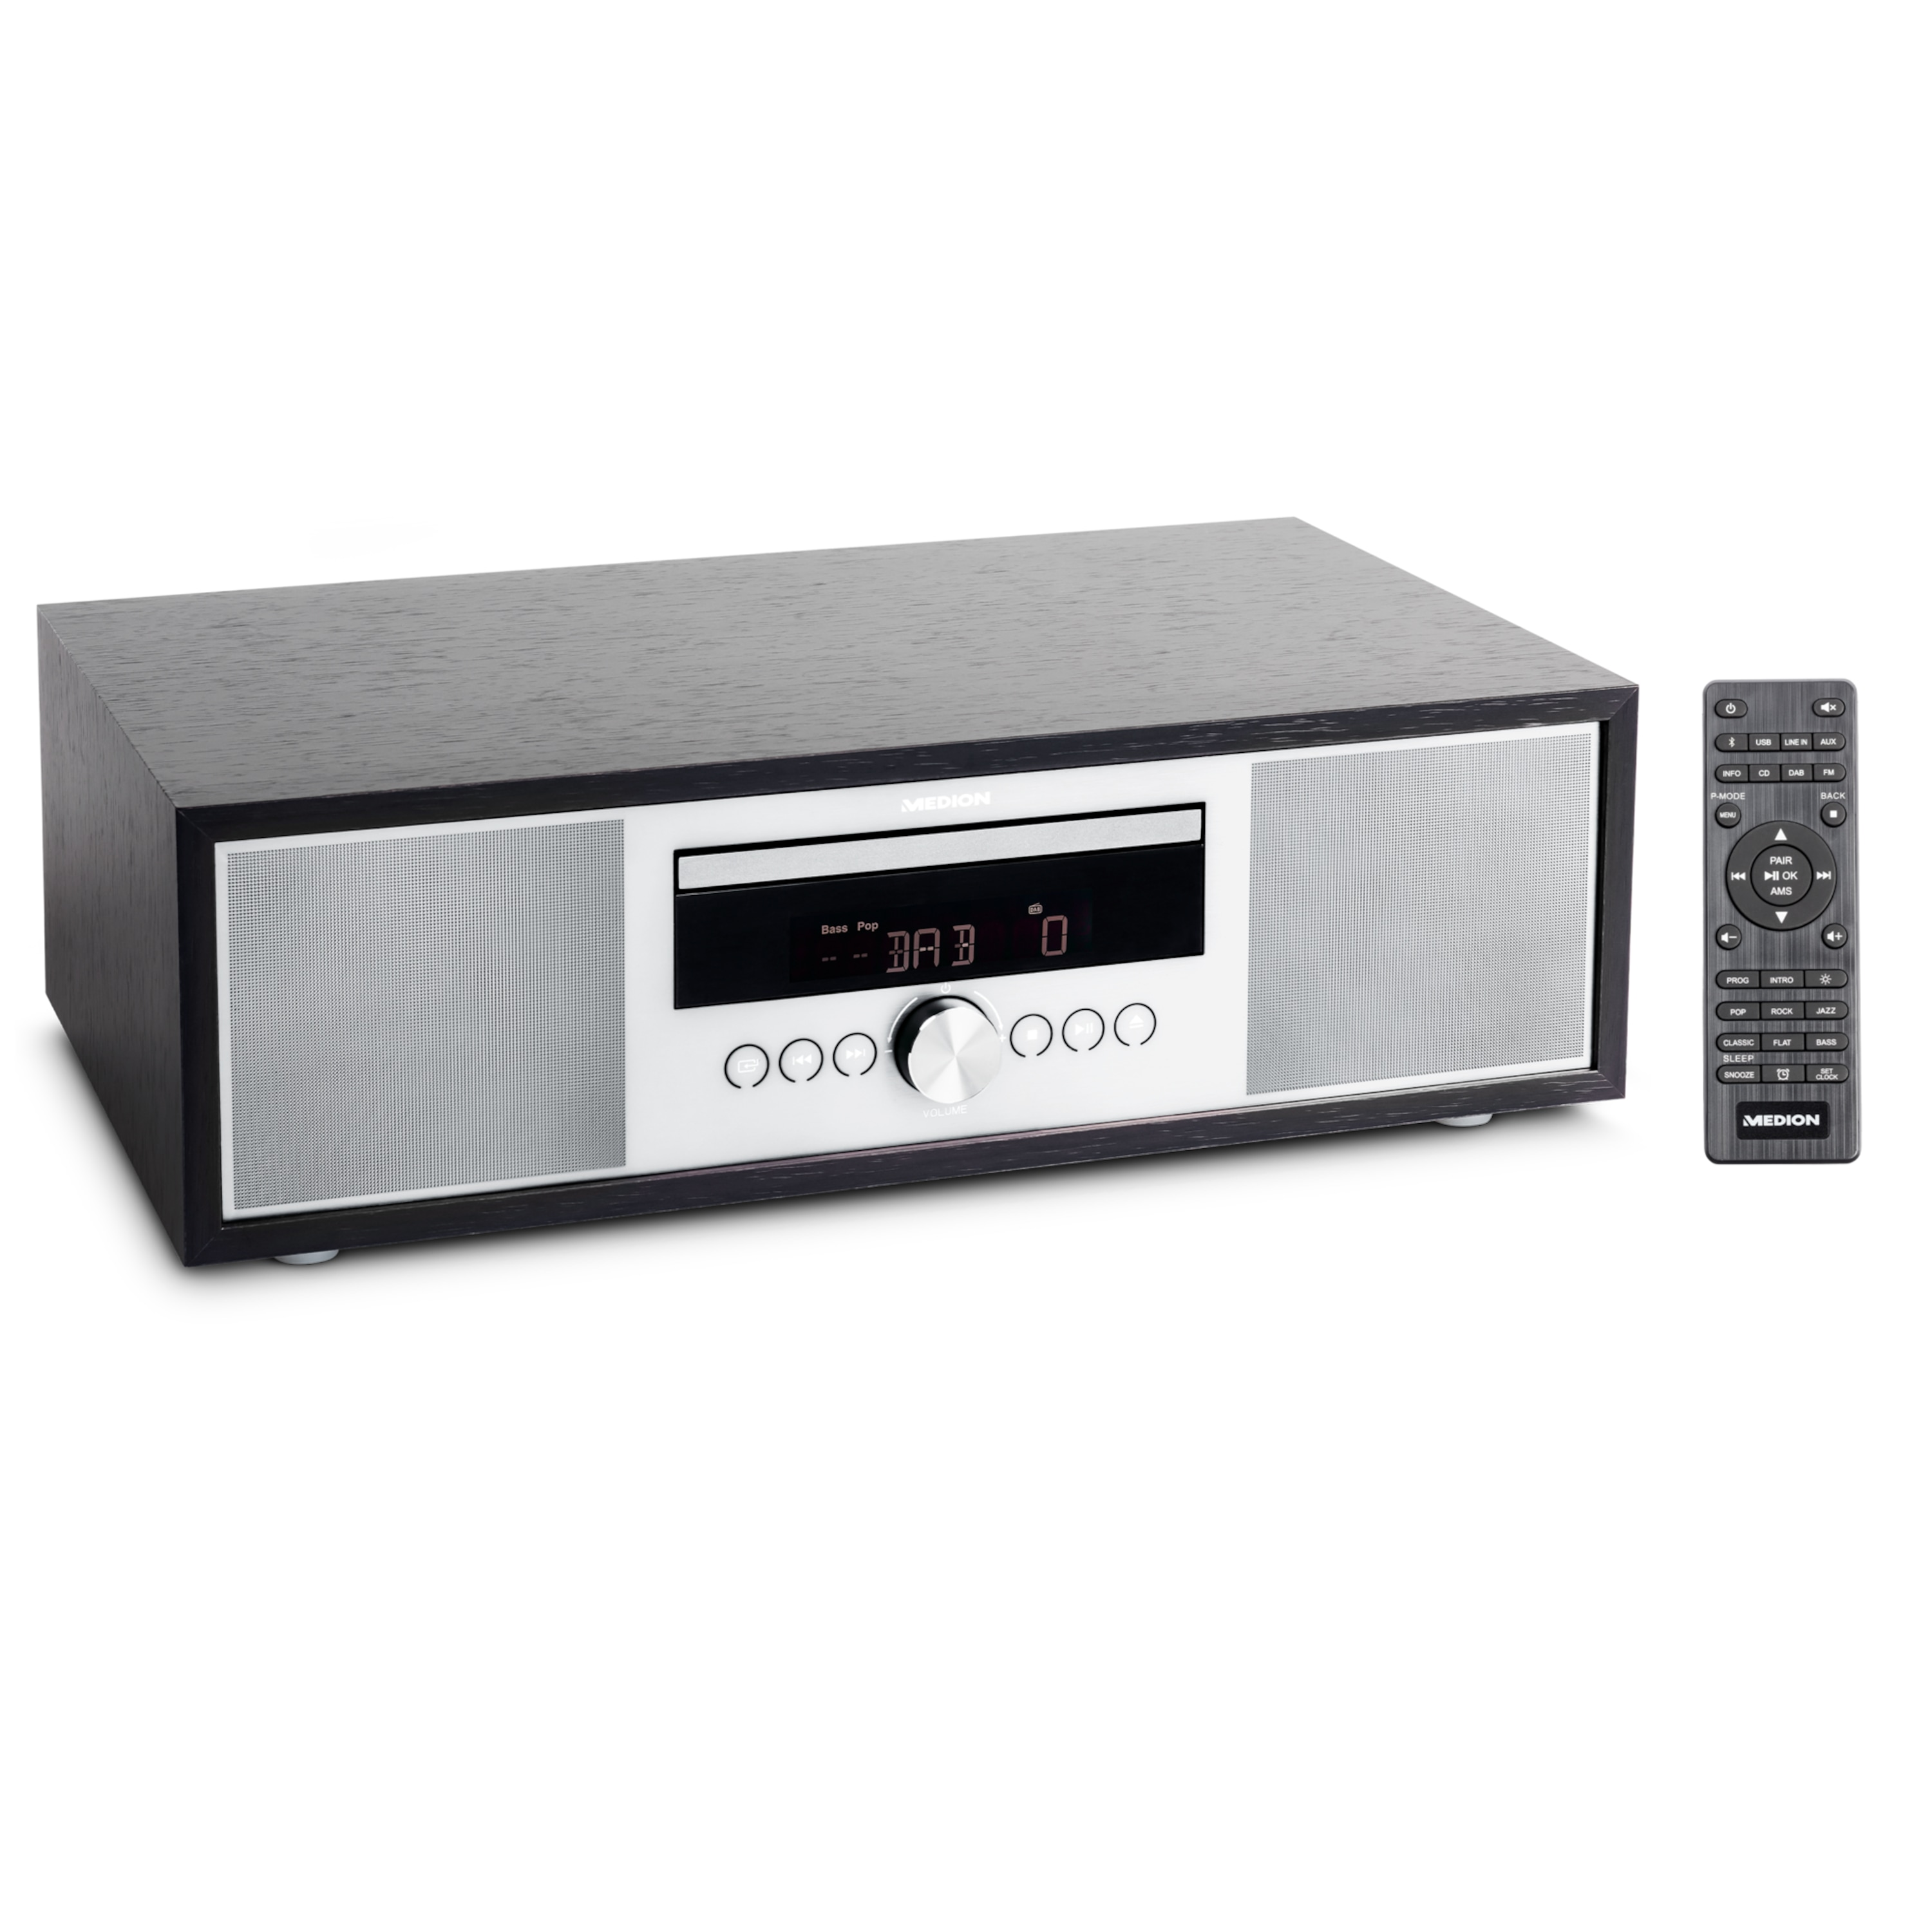 P64145, MEDION Radio USB, RMS W Stereo-Radio, x CD/MP3-Player, 2 LIFE® silber Bluetooth®, All-in-One 15 DAB+/PLL-UKW